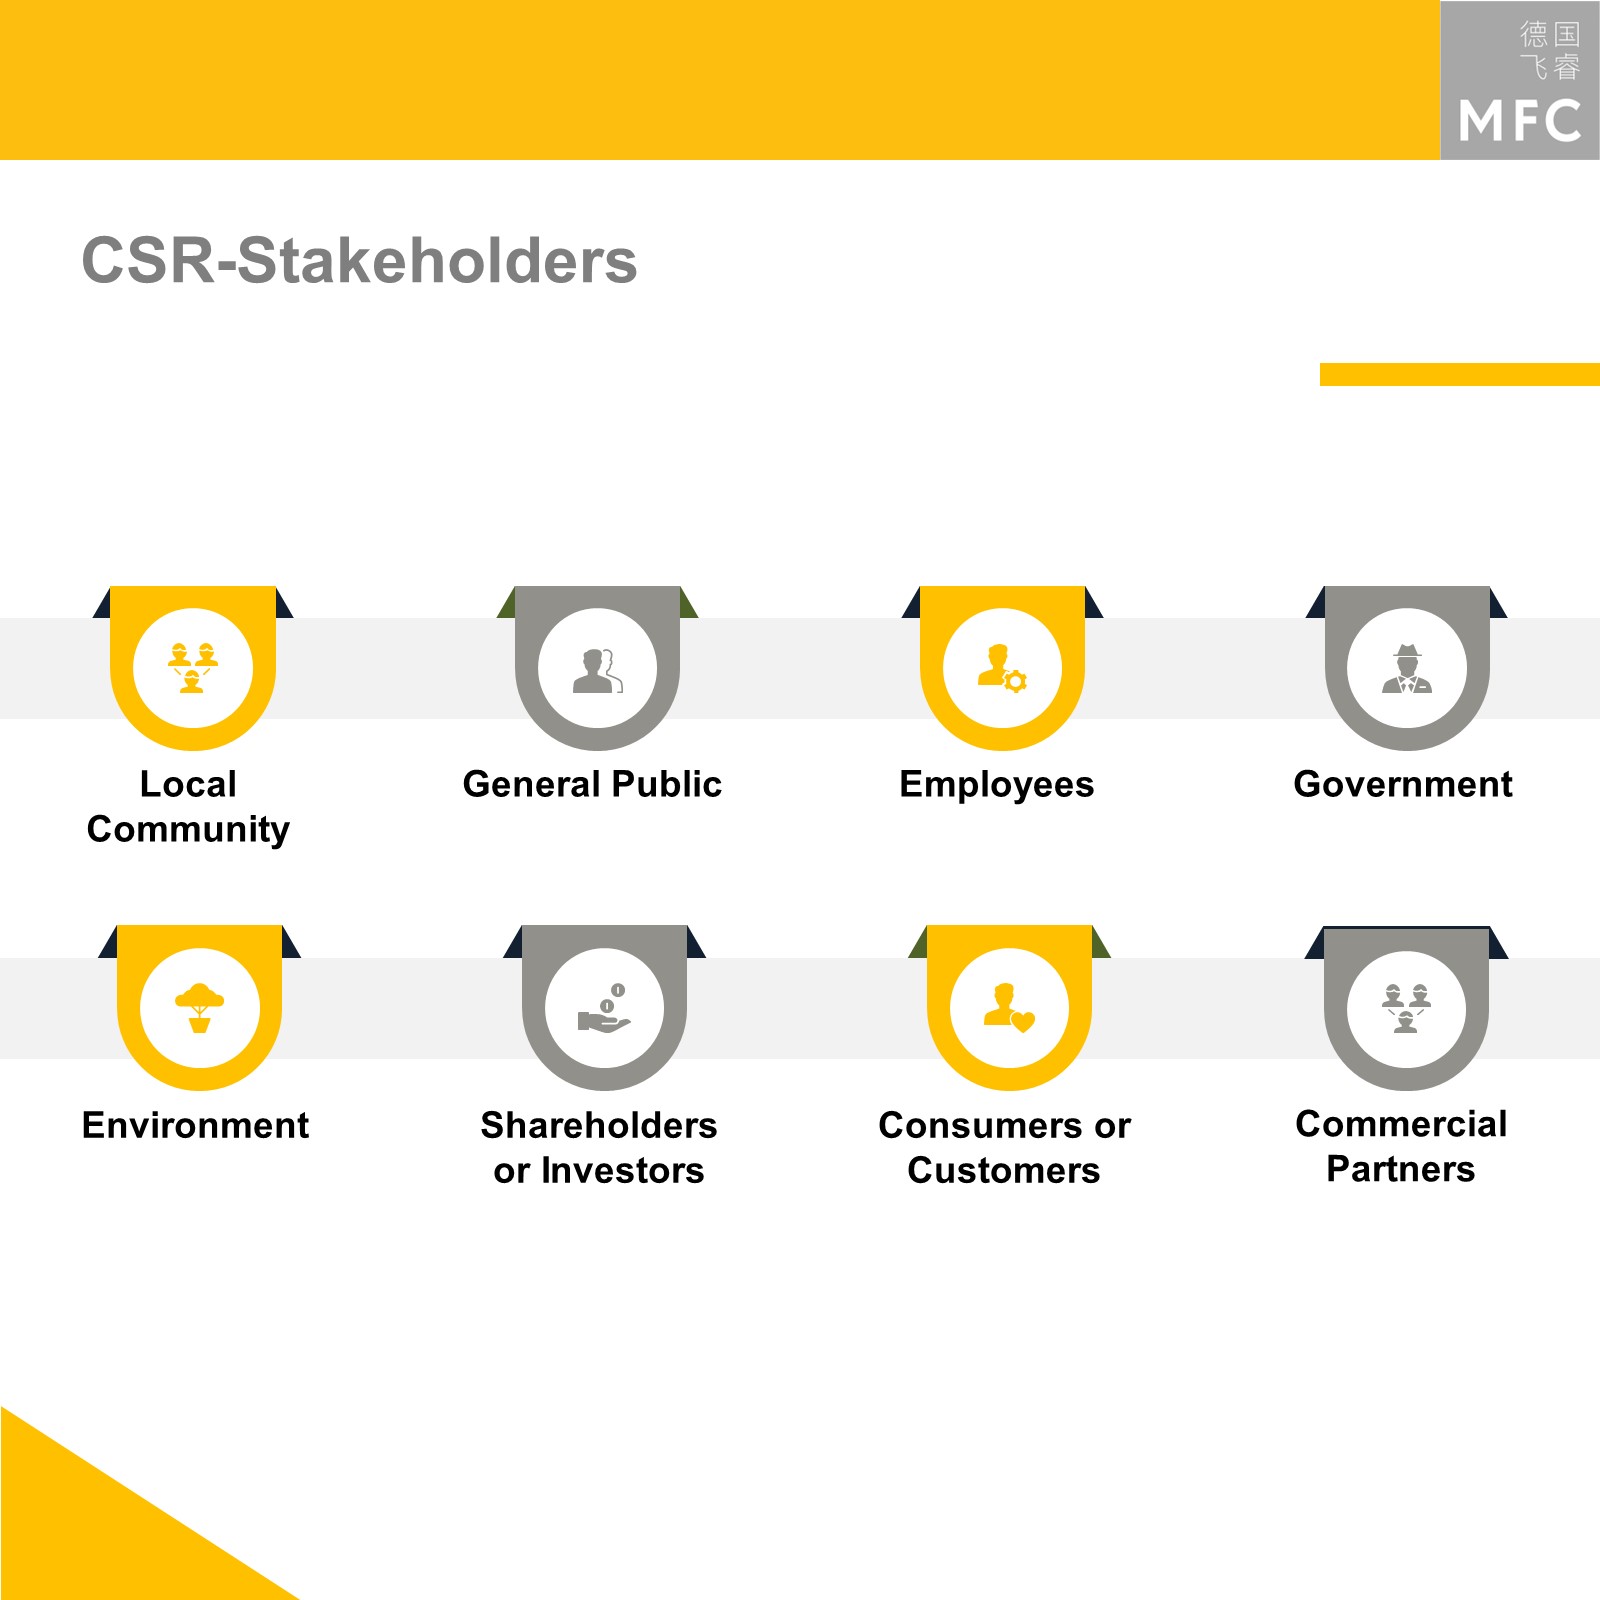 CSR Stakeholders: Local Community, General Public, Employees, Government, Environment, Shareholders or Investor, Consumers or Customers, Commercial Partners